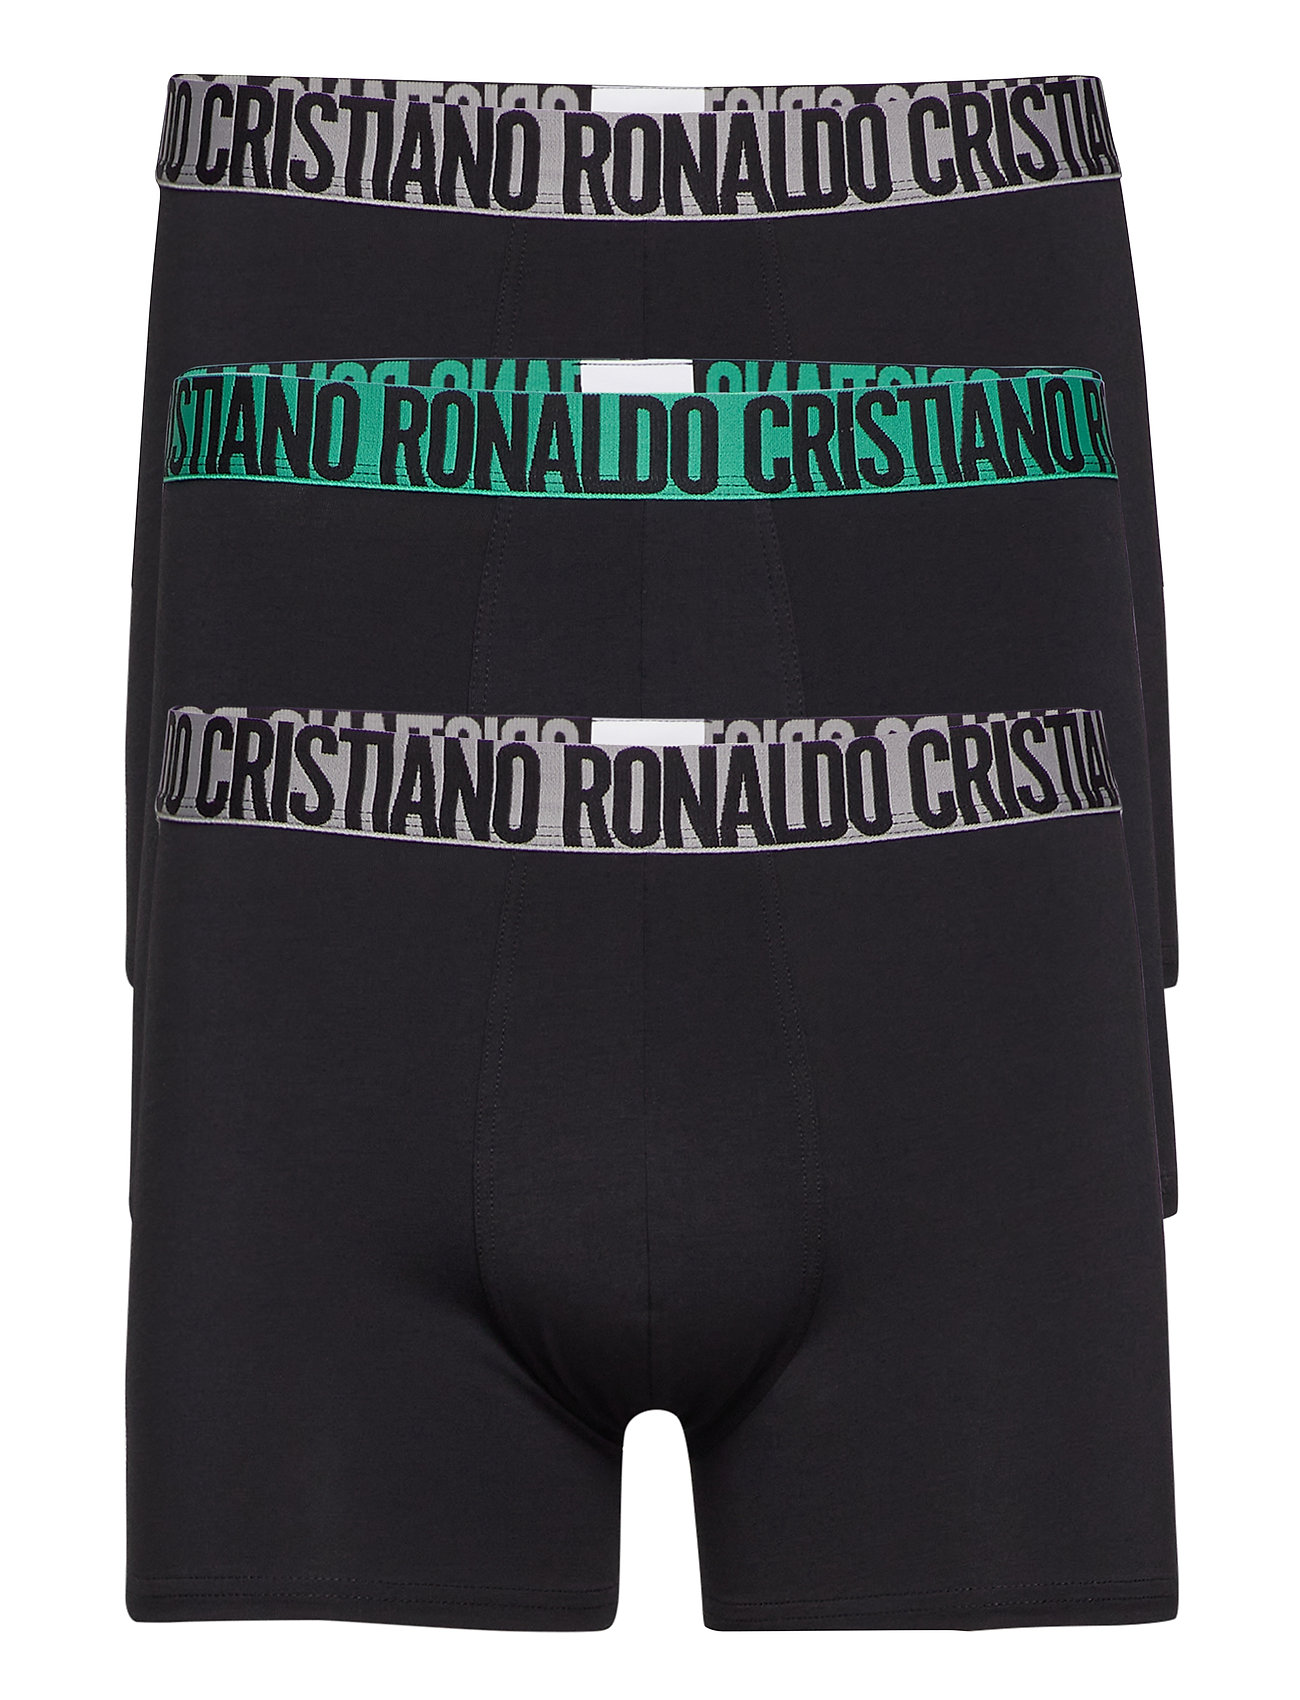 CR7 Cr7 Basic, Trunk, 3-pack. – underpants – shop at Booztlet